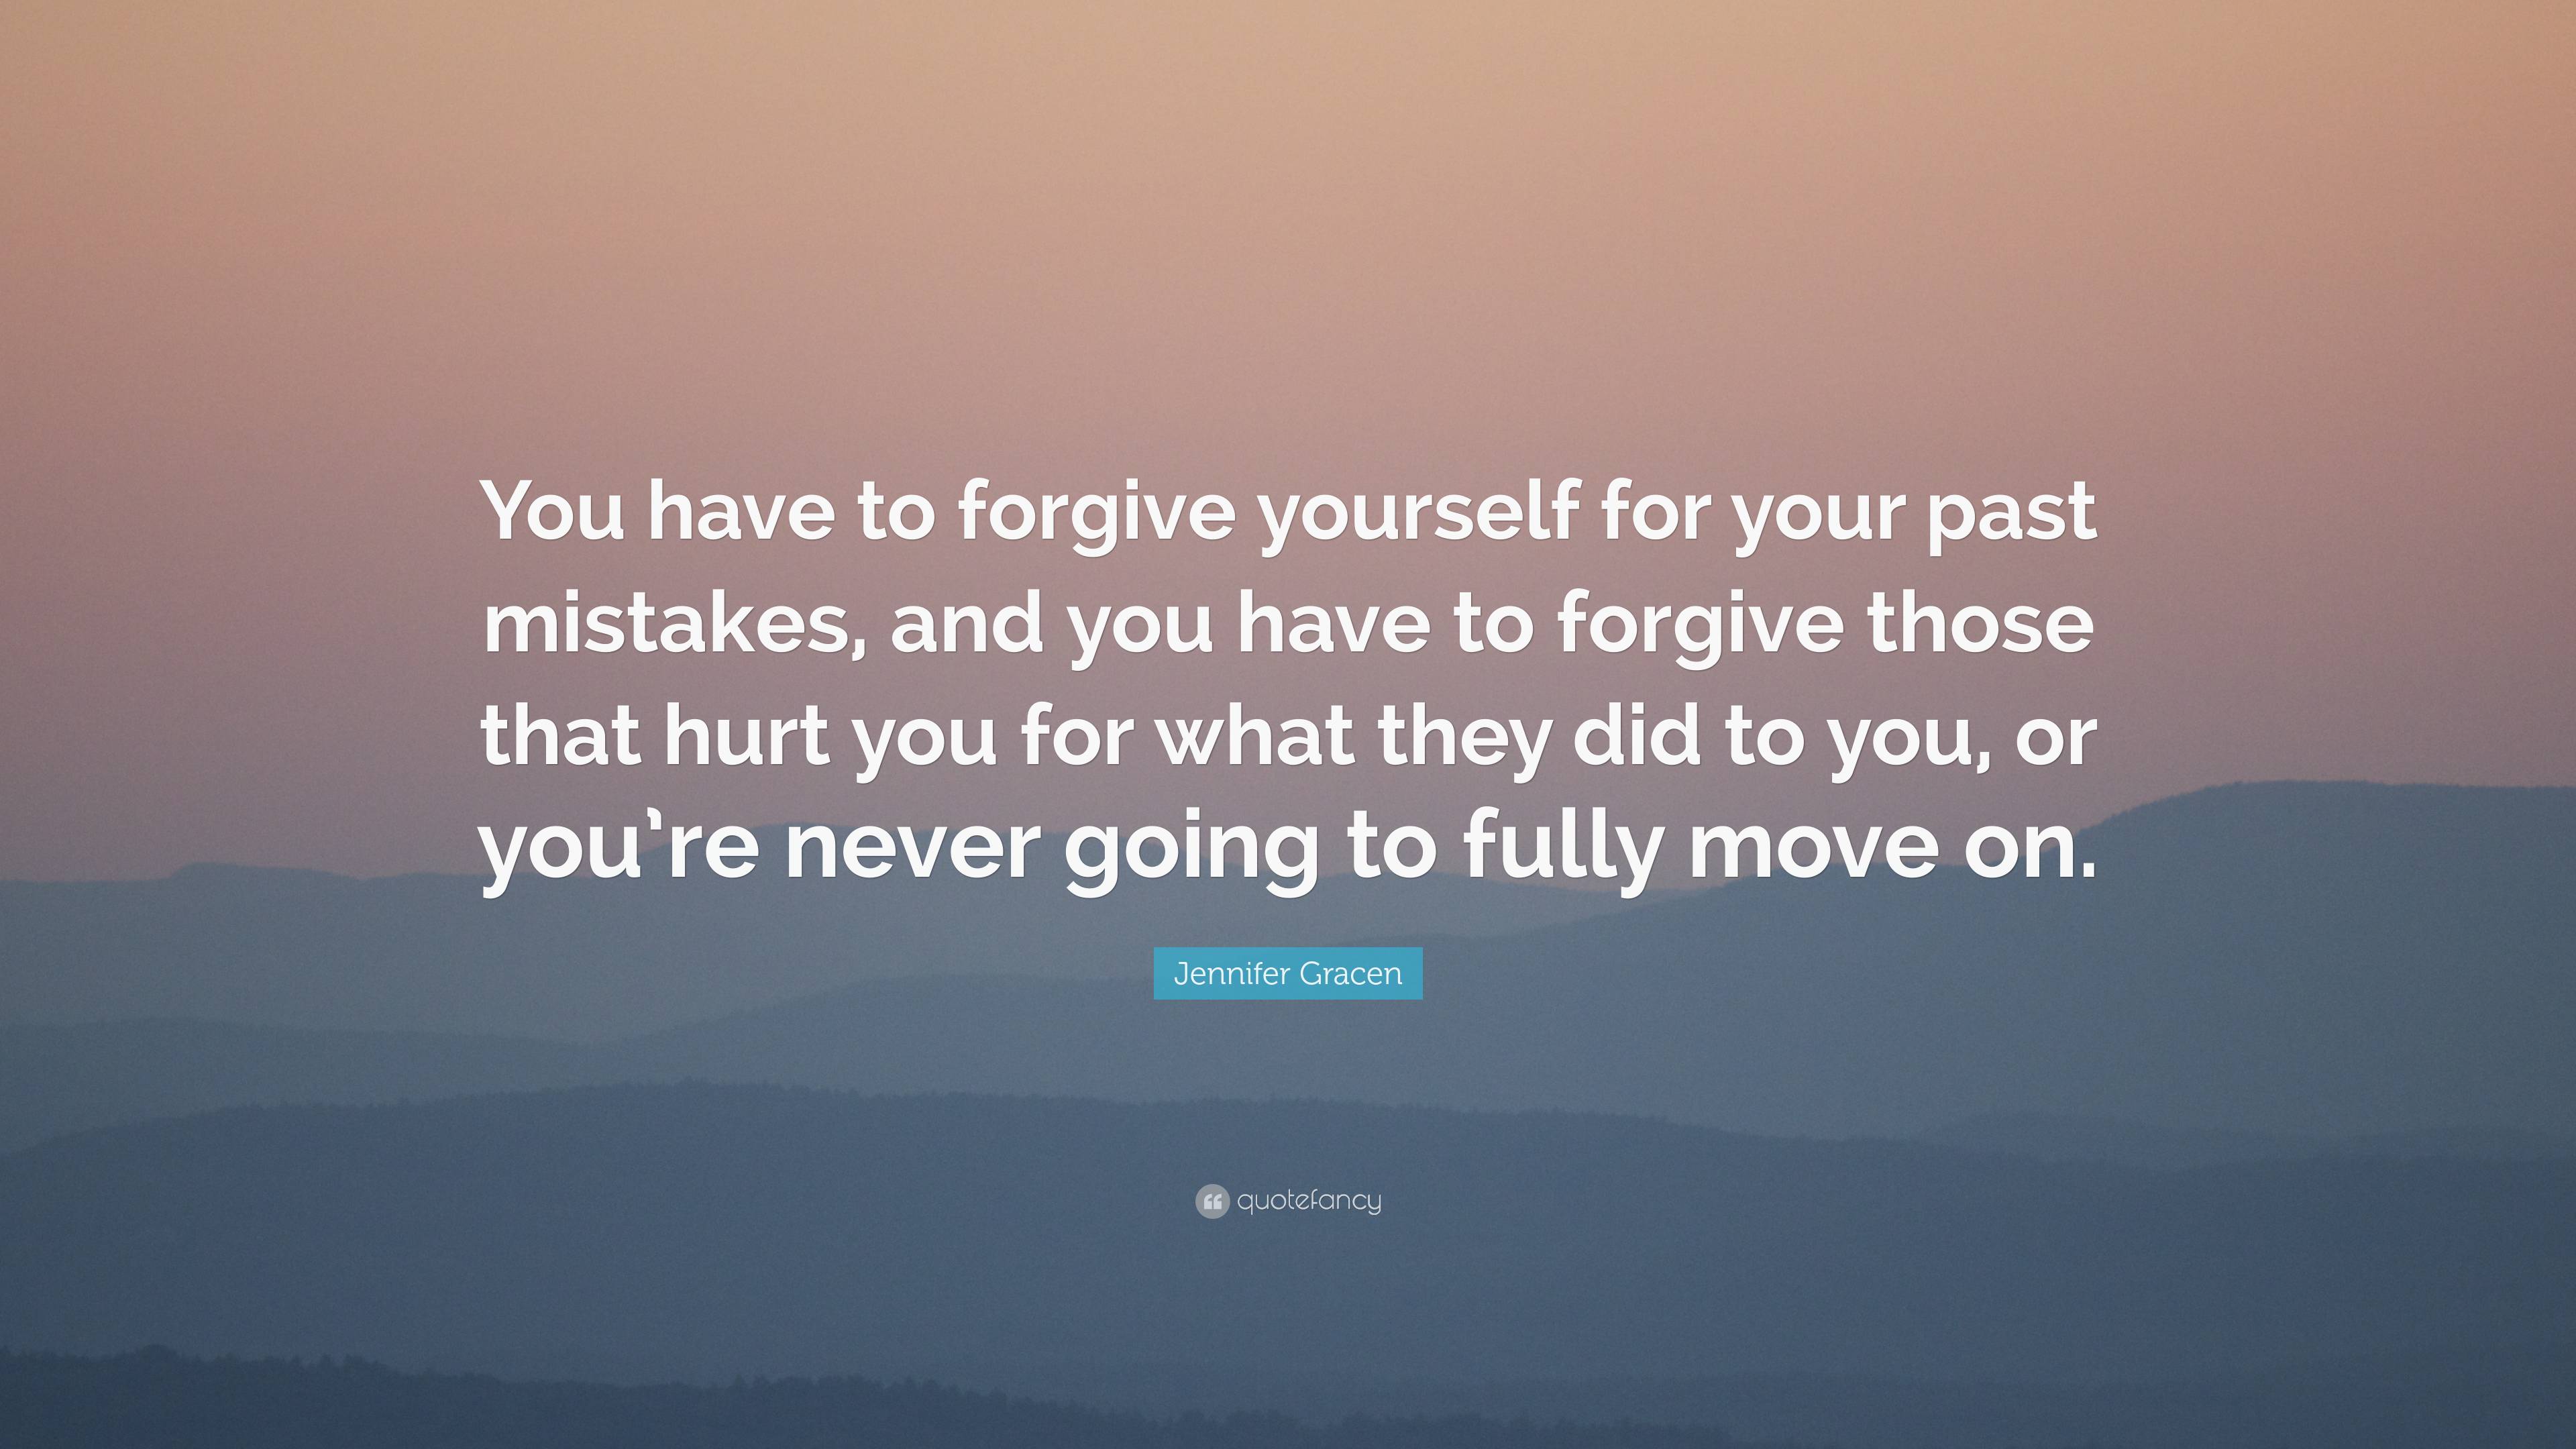 75 Forgiveness Quotes To Help You Move On